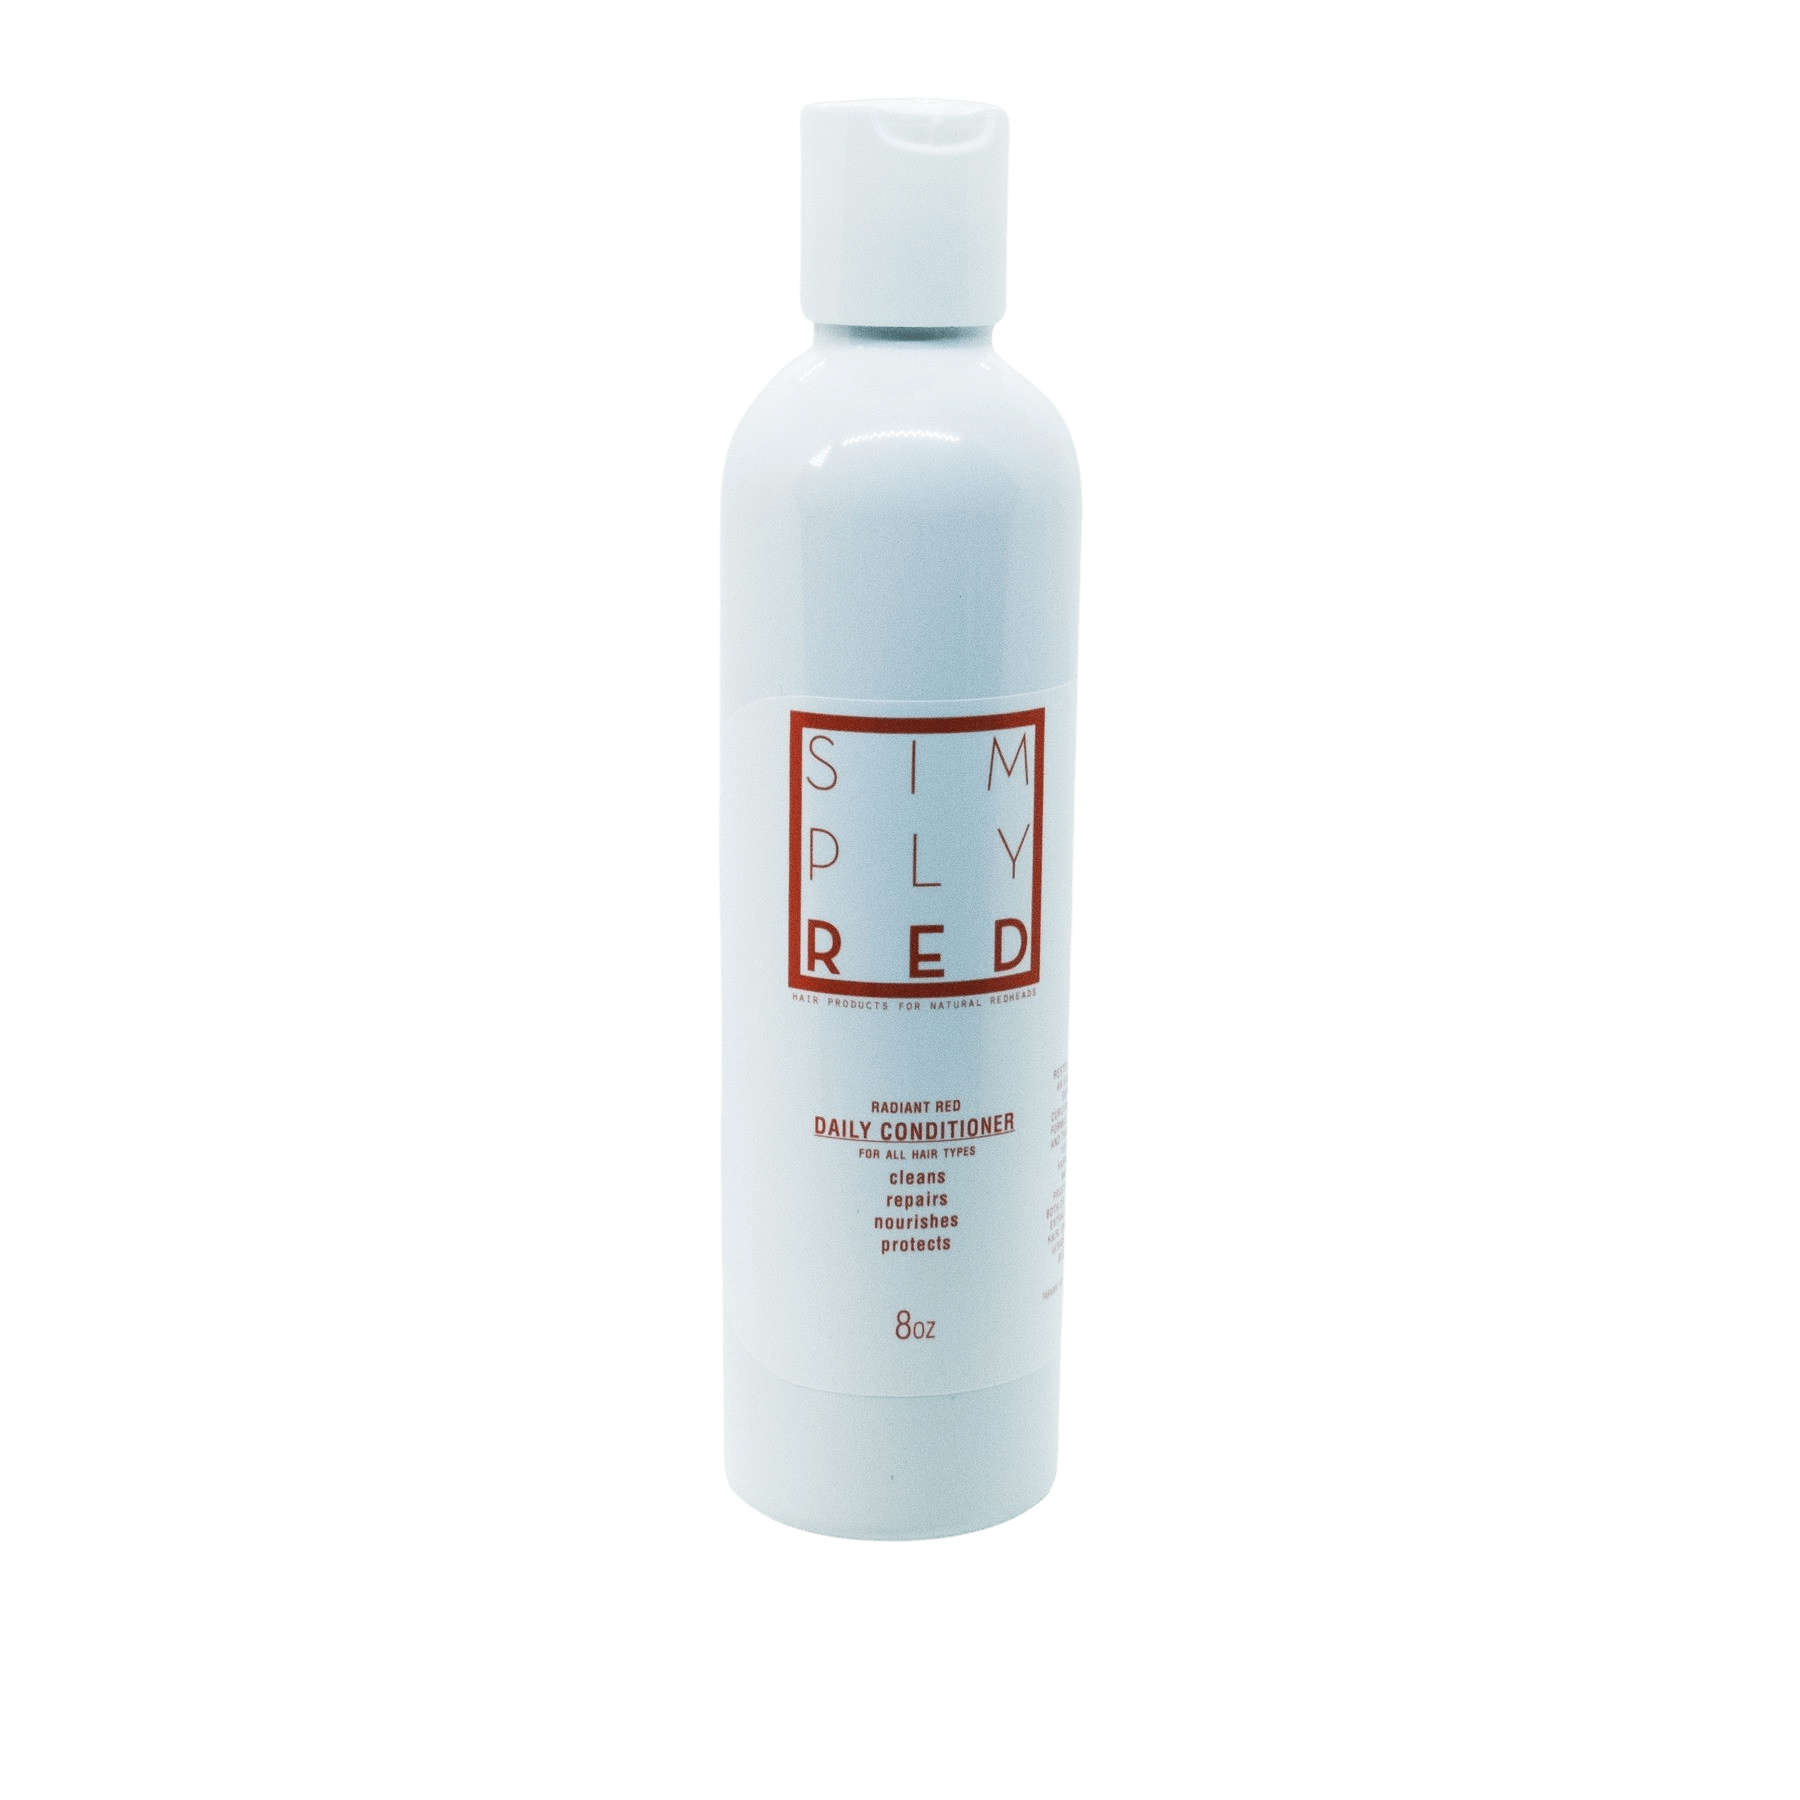 Simply Red Conditioner for natural redheads